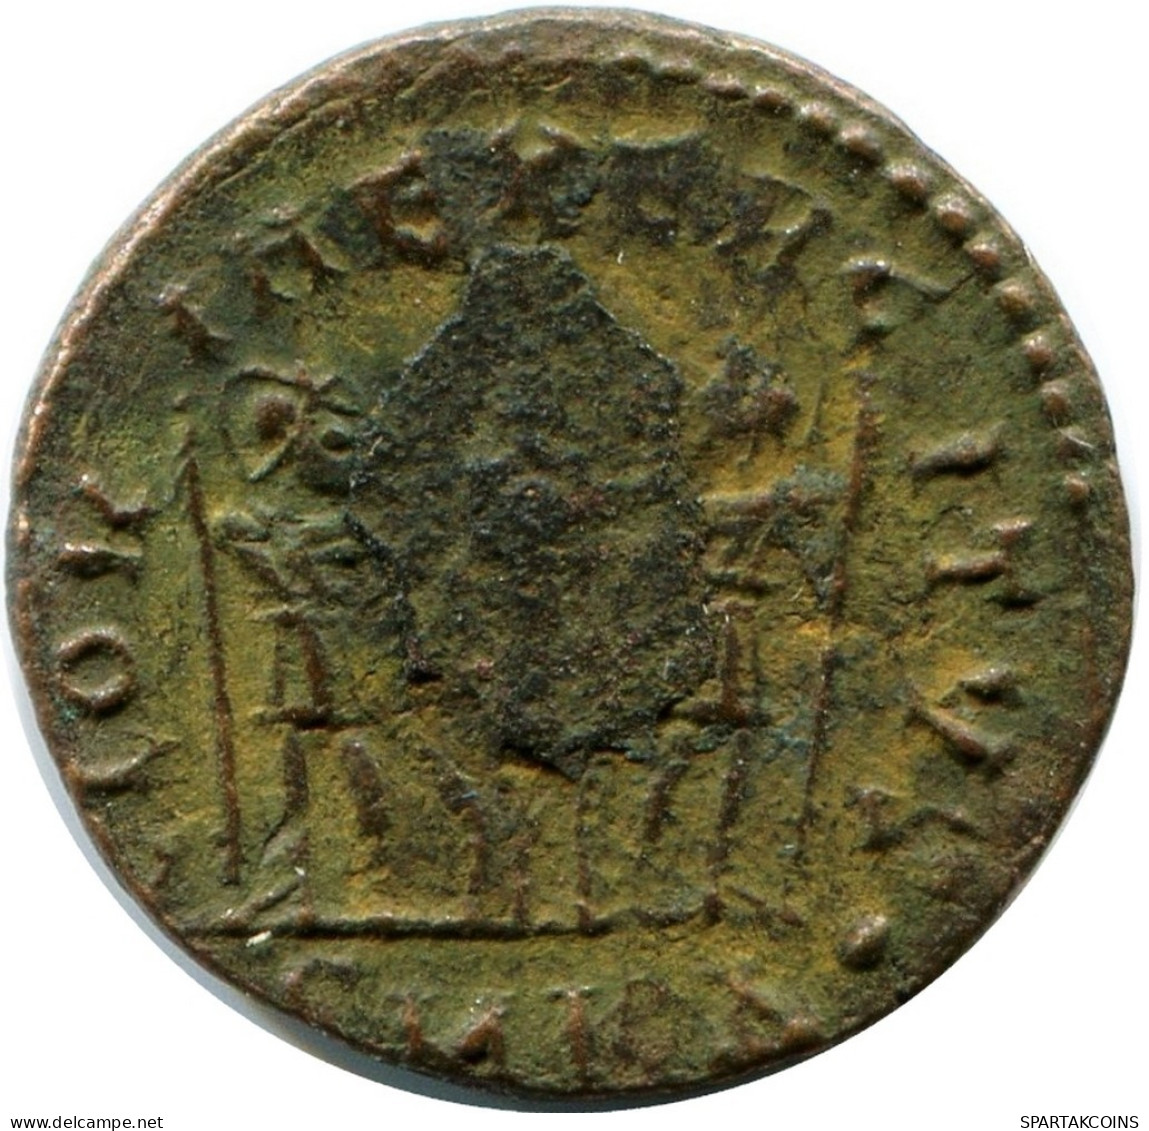 CONSTANS MINTED IN CYZICUS FROM THE ROYAL ONTARIO MUSEUM #ANC11626.14.D.A - El Impero Christiano (307 / 363)